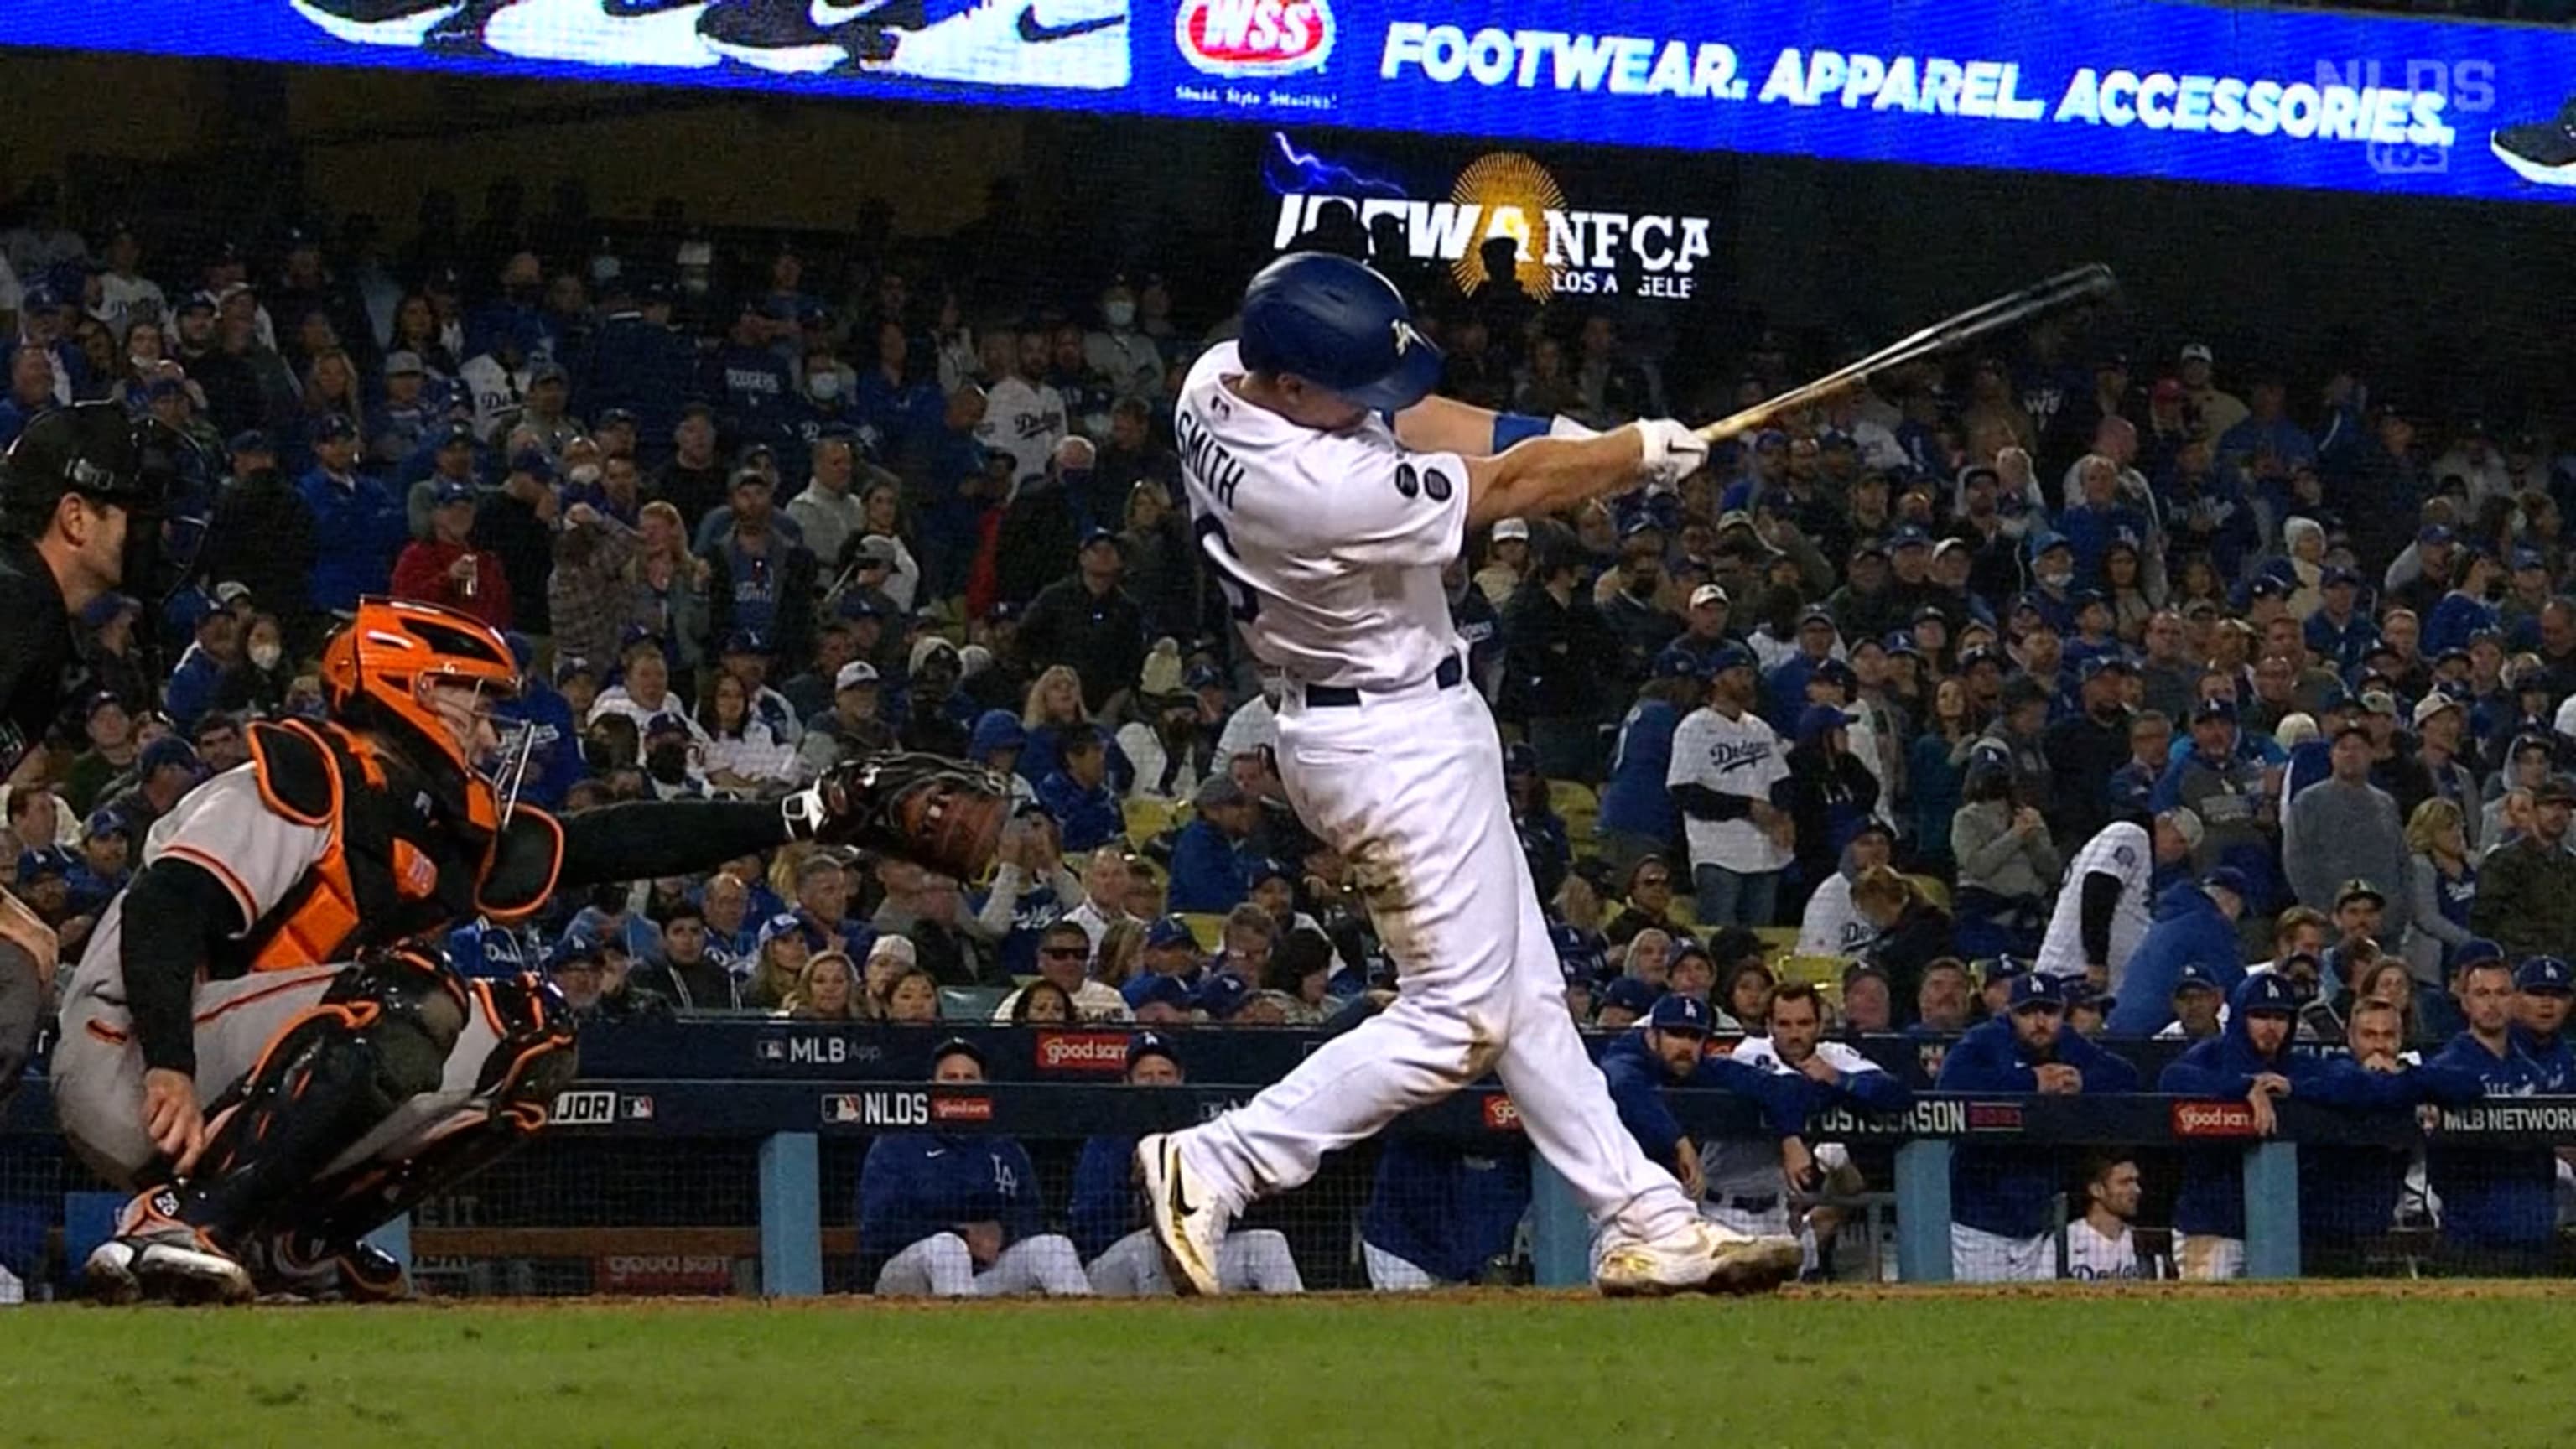 Giants' season ends with brutal check-swing call in NLDS Game 5 vs. Dodgers